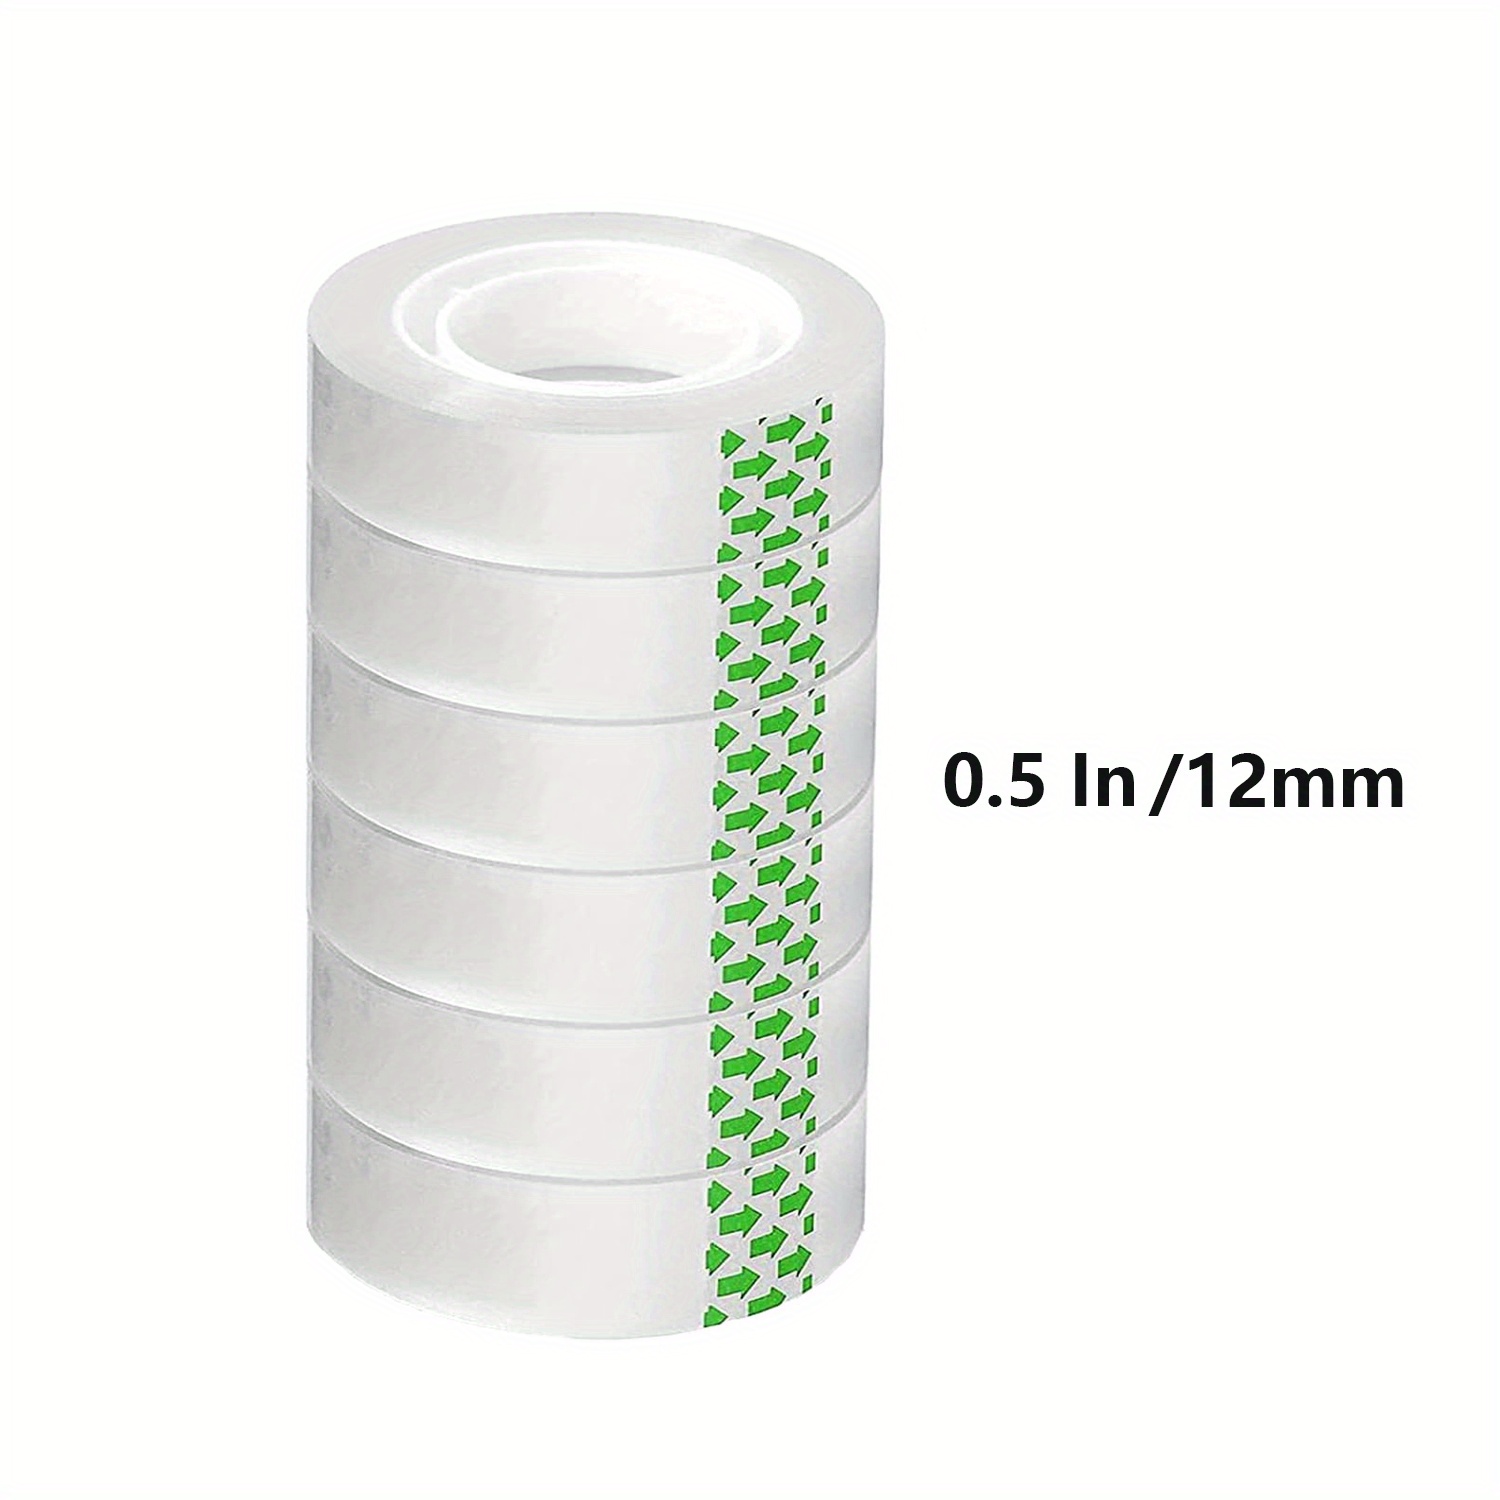 12 Rolls 0.7 Inches Transparent Tape Refills, Clear Tape Dispenser Refill  Rolls, Glossy Gift Wrap Tapes for Office, School, Home 